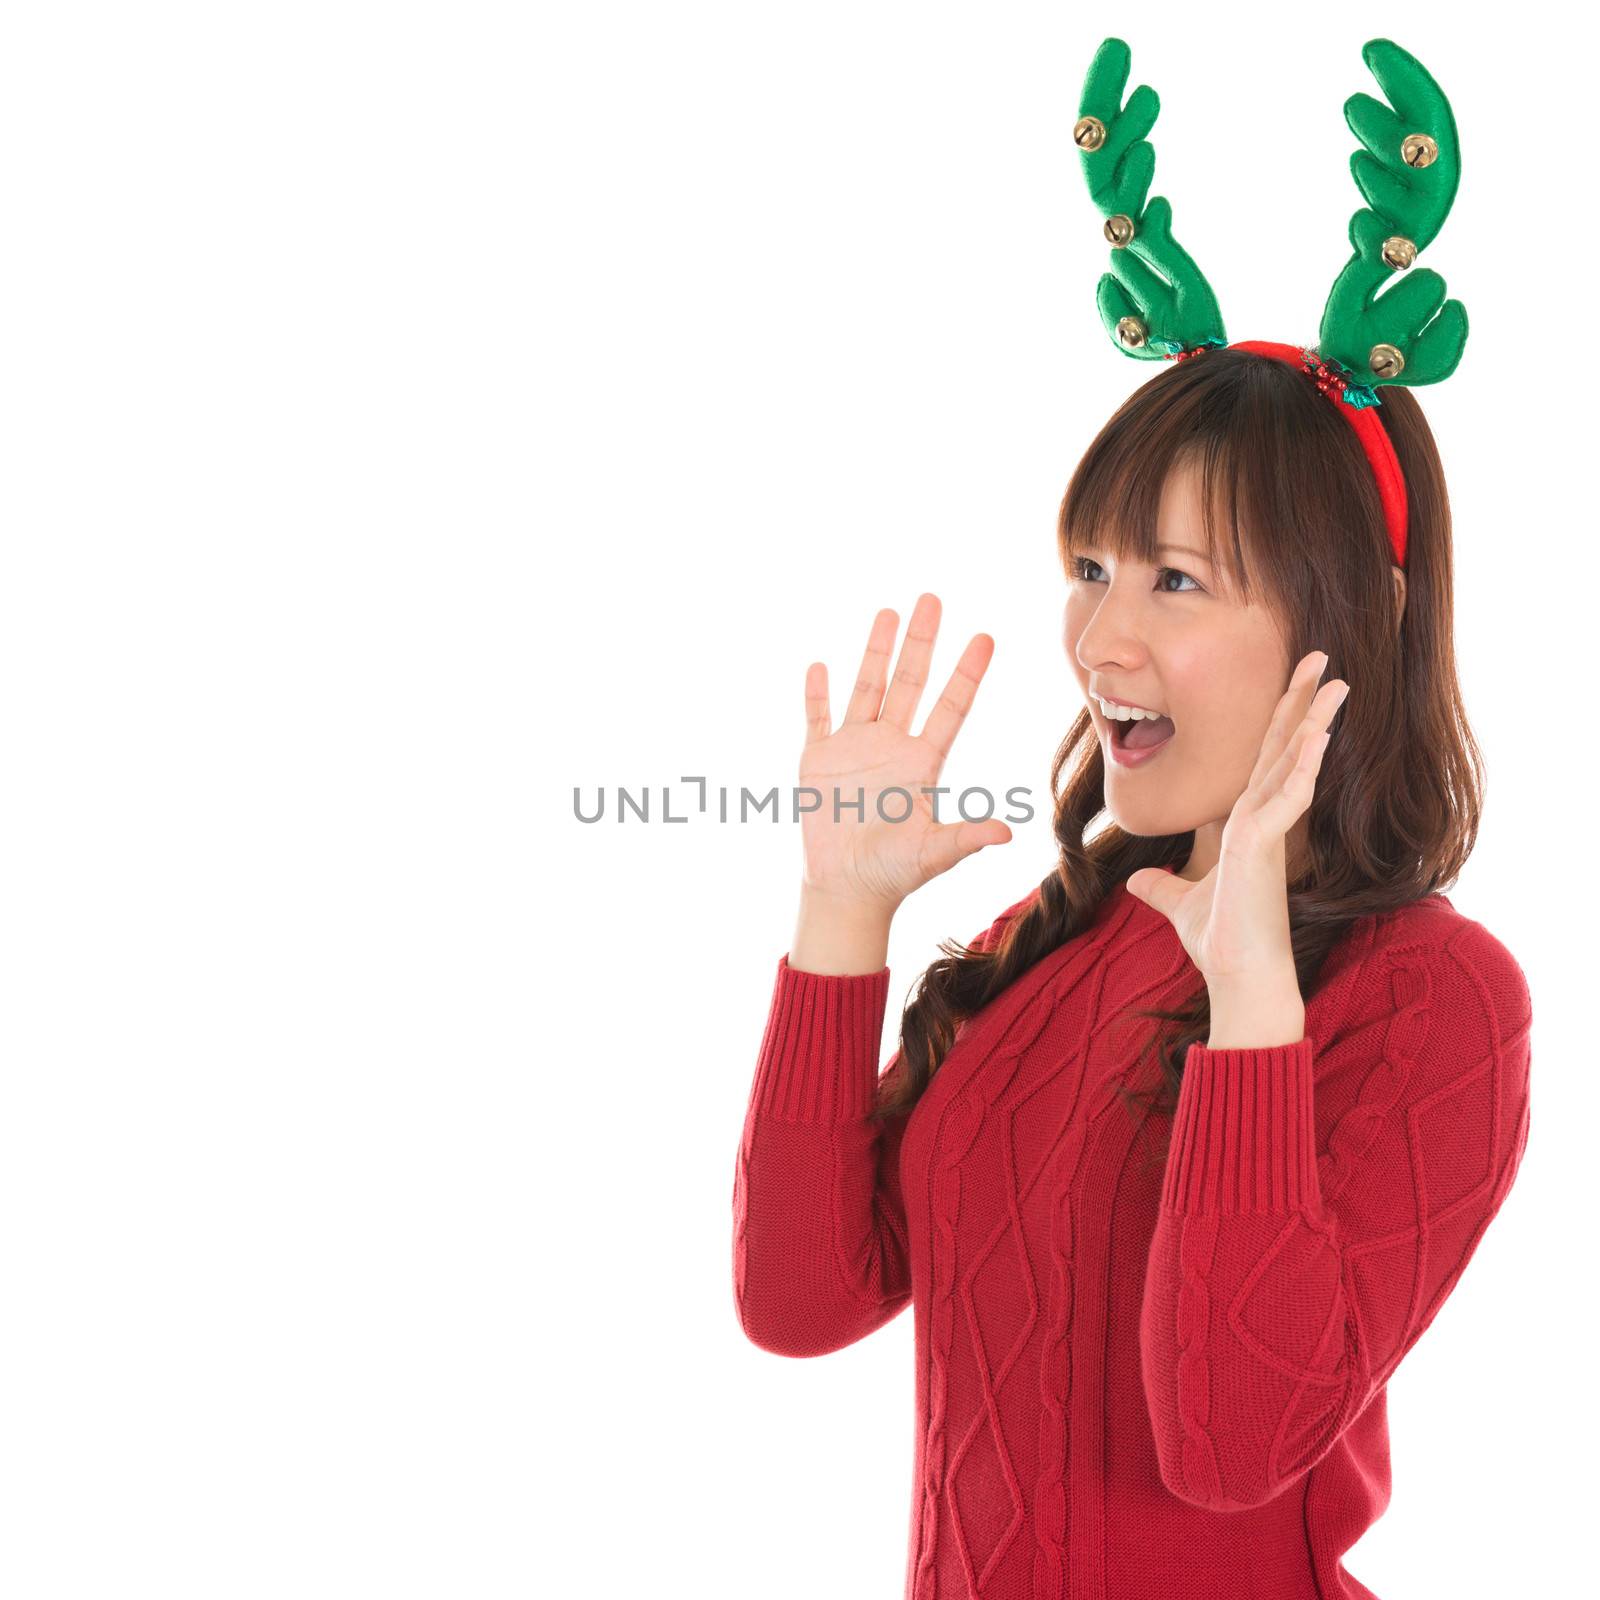 Happy Asian Santa woman shouting isolated over white background. Asian female model.